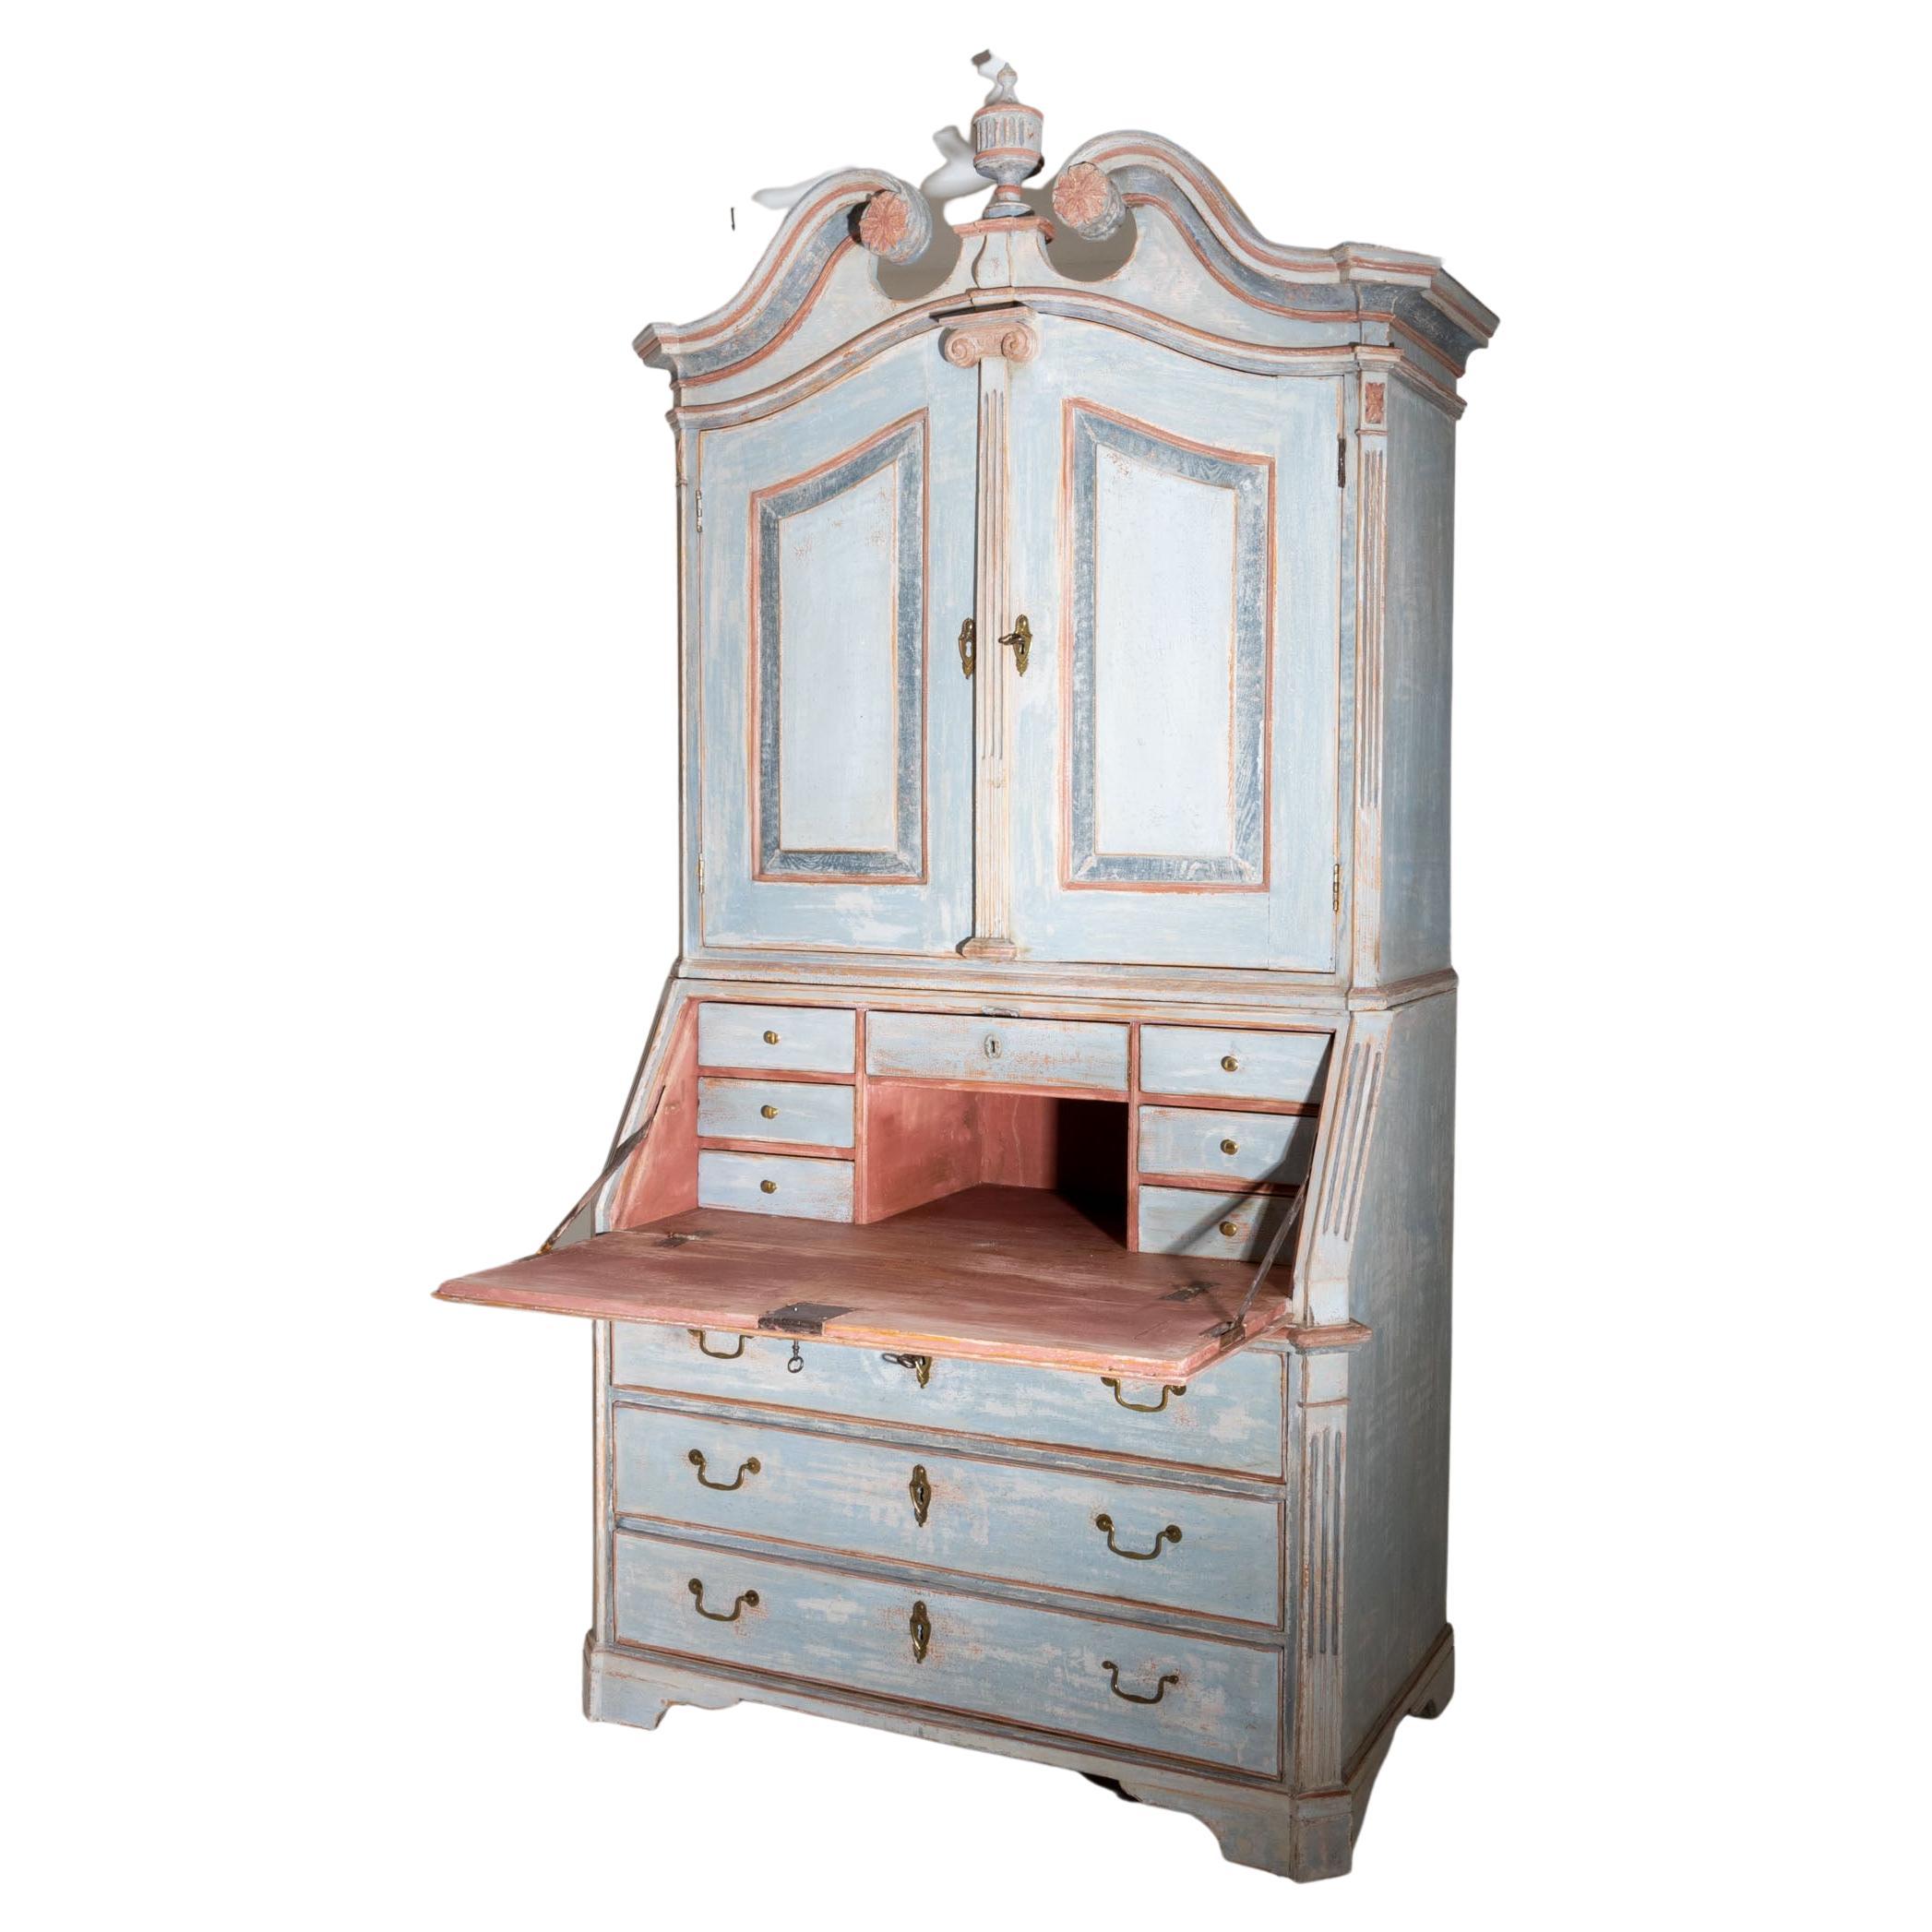 Hand painted top secretary with slanted flap and three-panel commode base as well as two-door top with swan-neck pediment and central urn motif. The interior consists of smaller drawers. The light blue frame with brick red accents is new and has